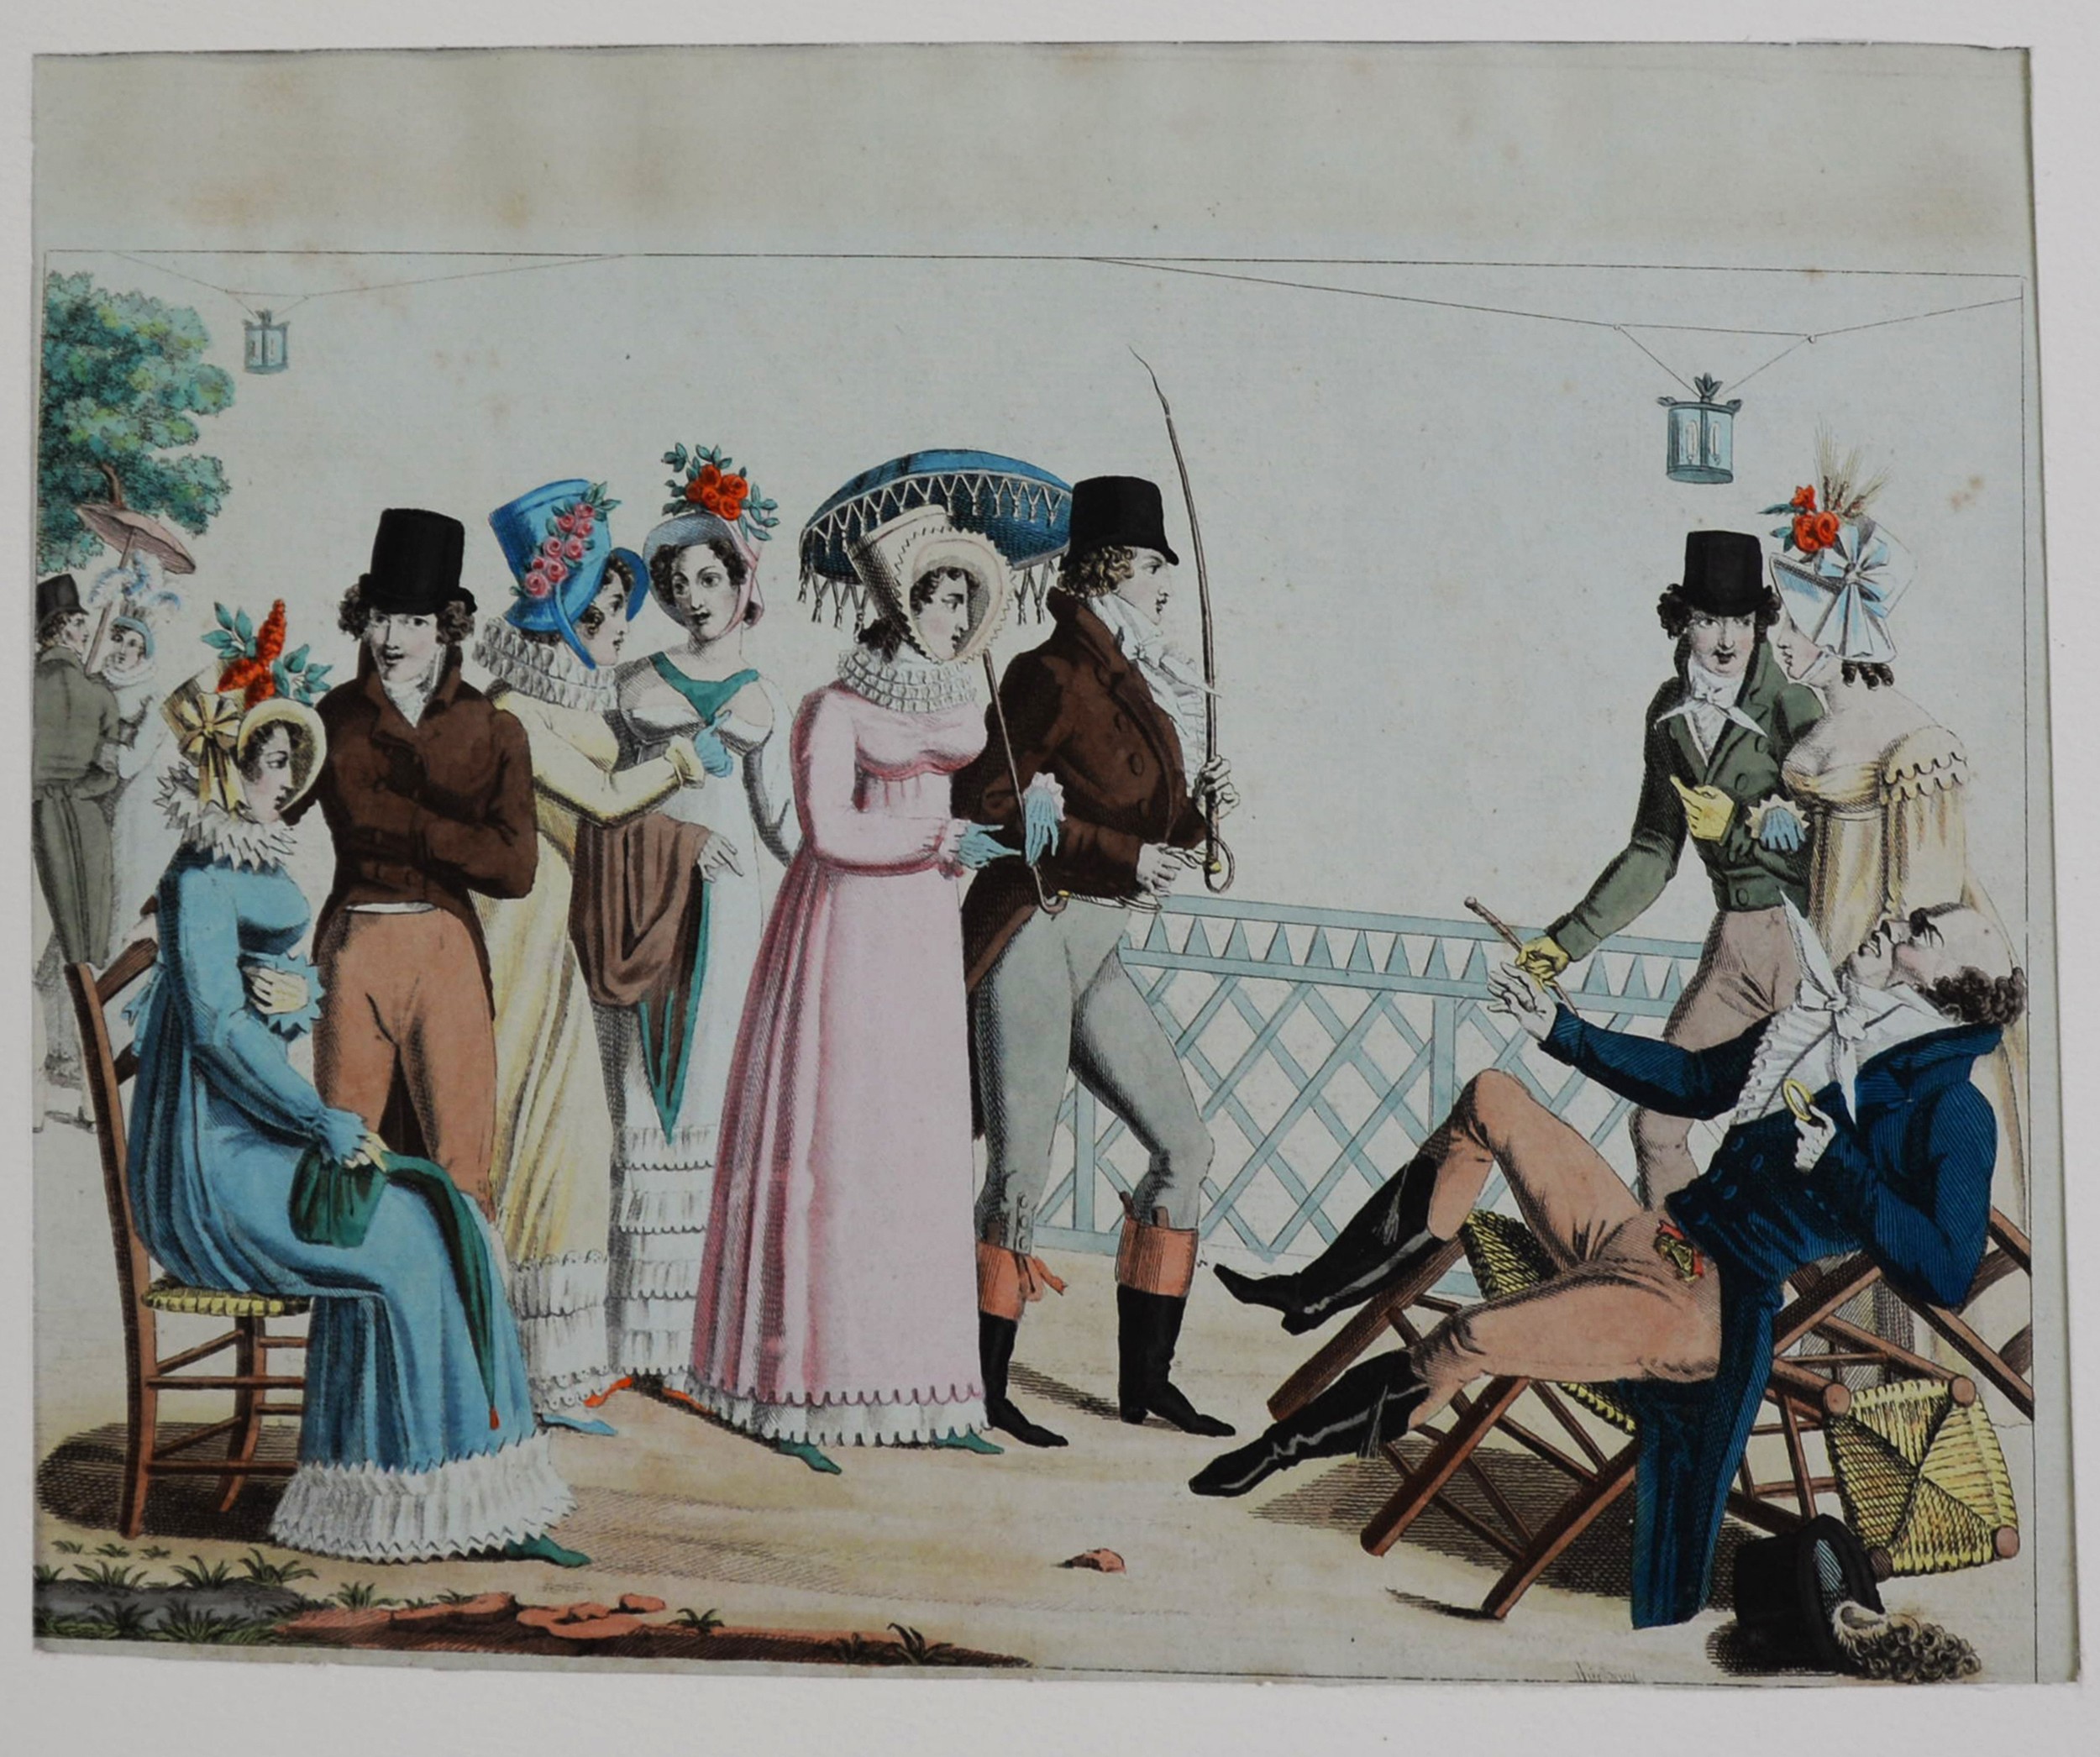 PAIR OF EARLY NINETEENTH CENTURY FRENCH HAND COLOURED FASHION PRINTS 8” X 11 ¼” (20.3cm x 28.